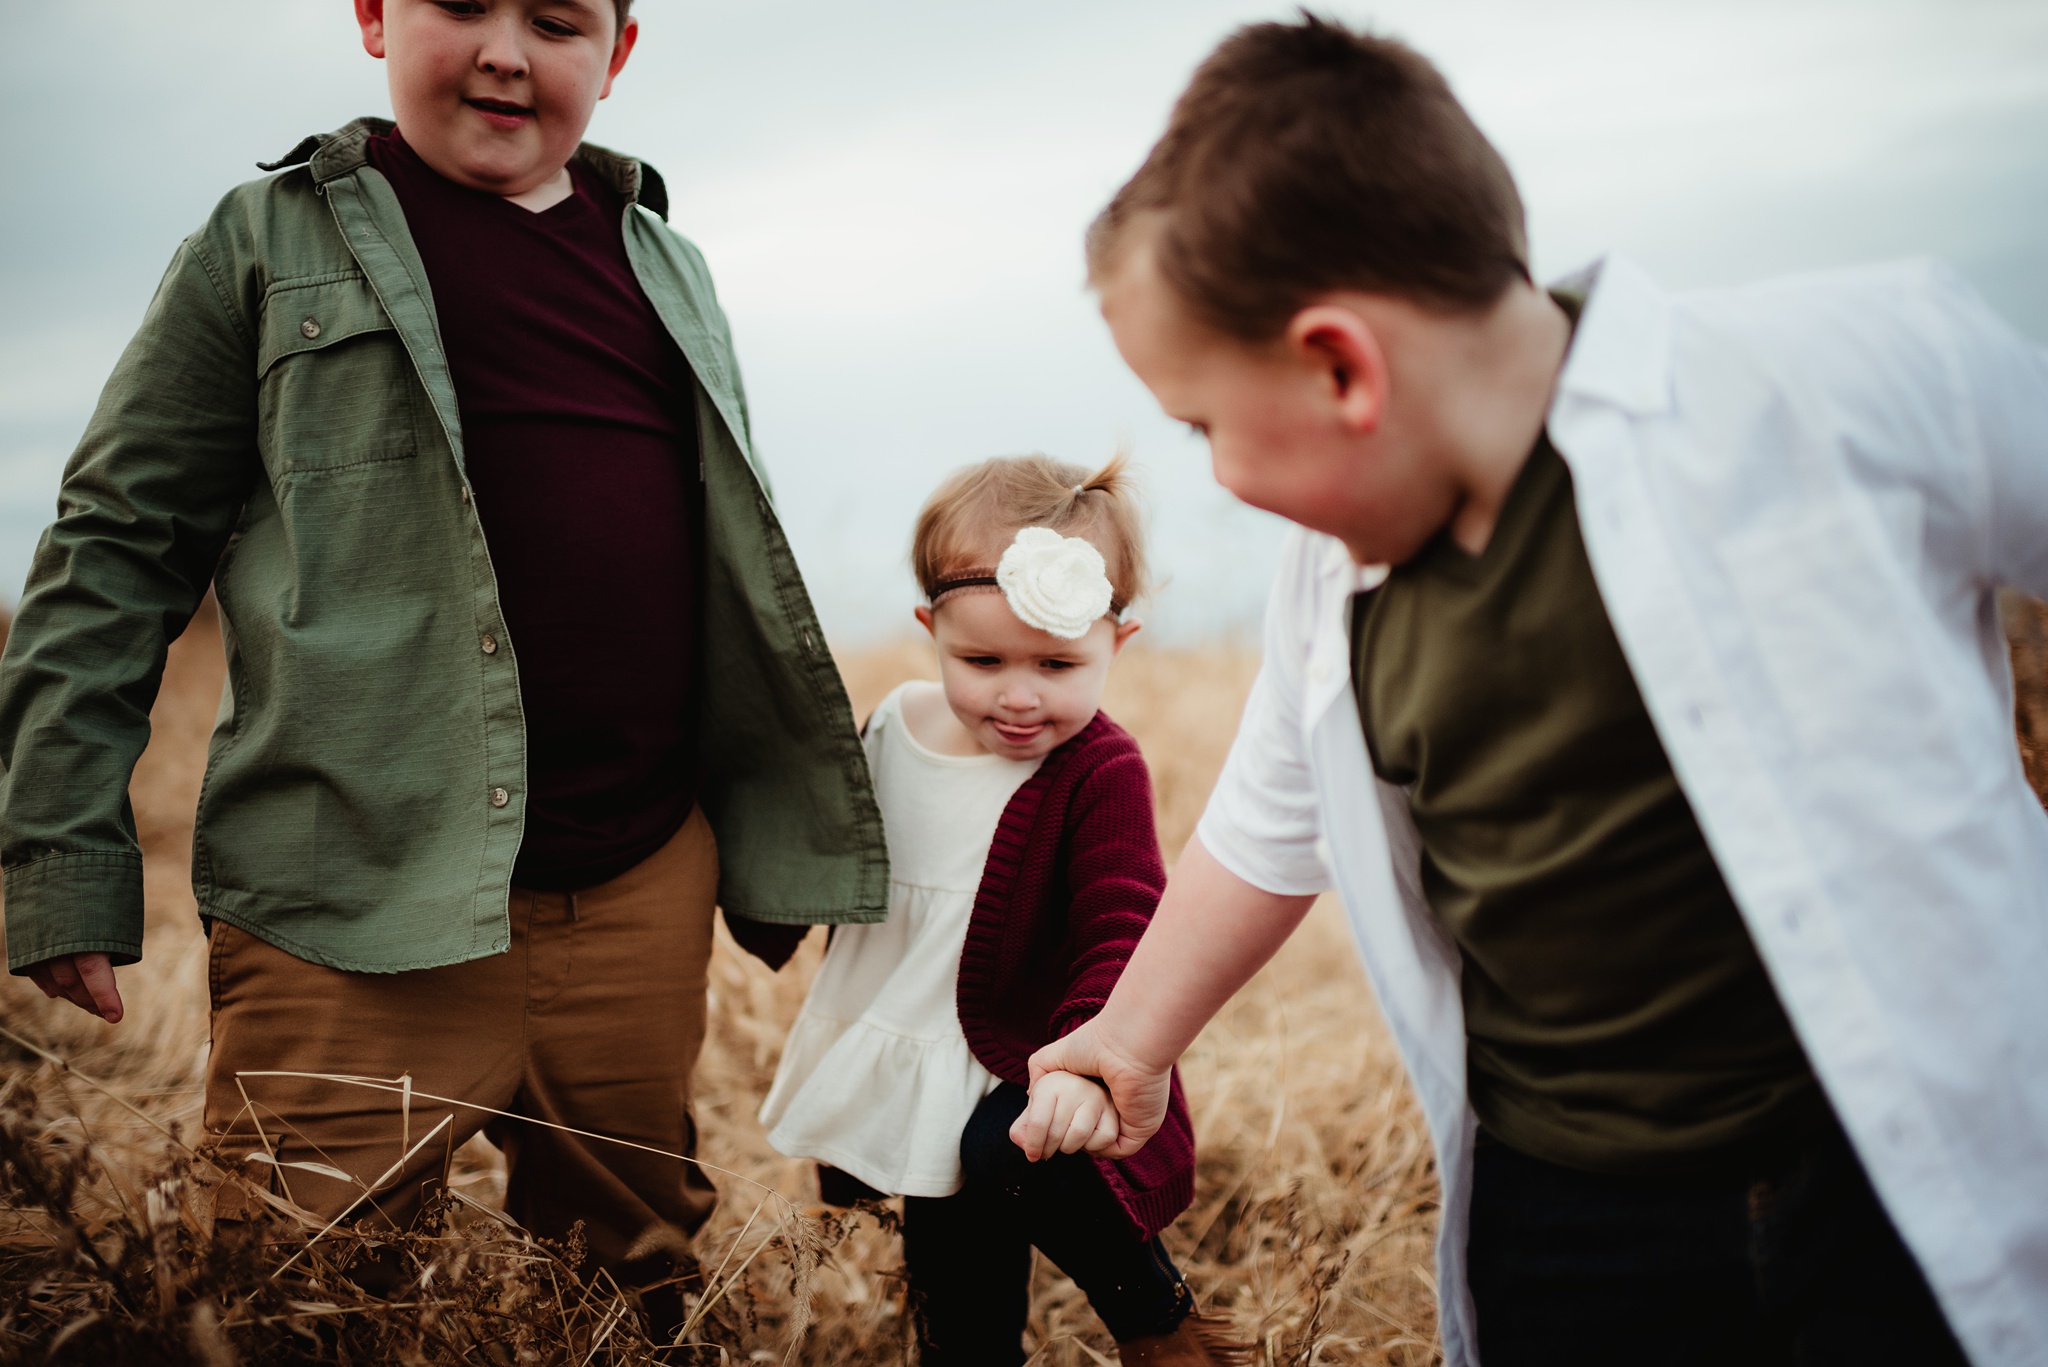 Family of Five Session on the Farm